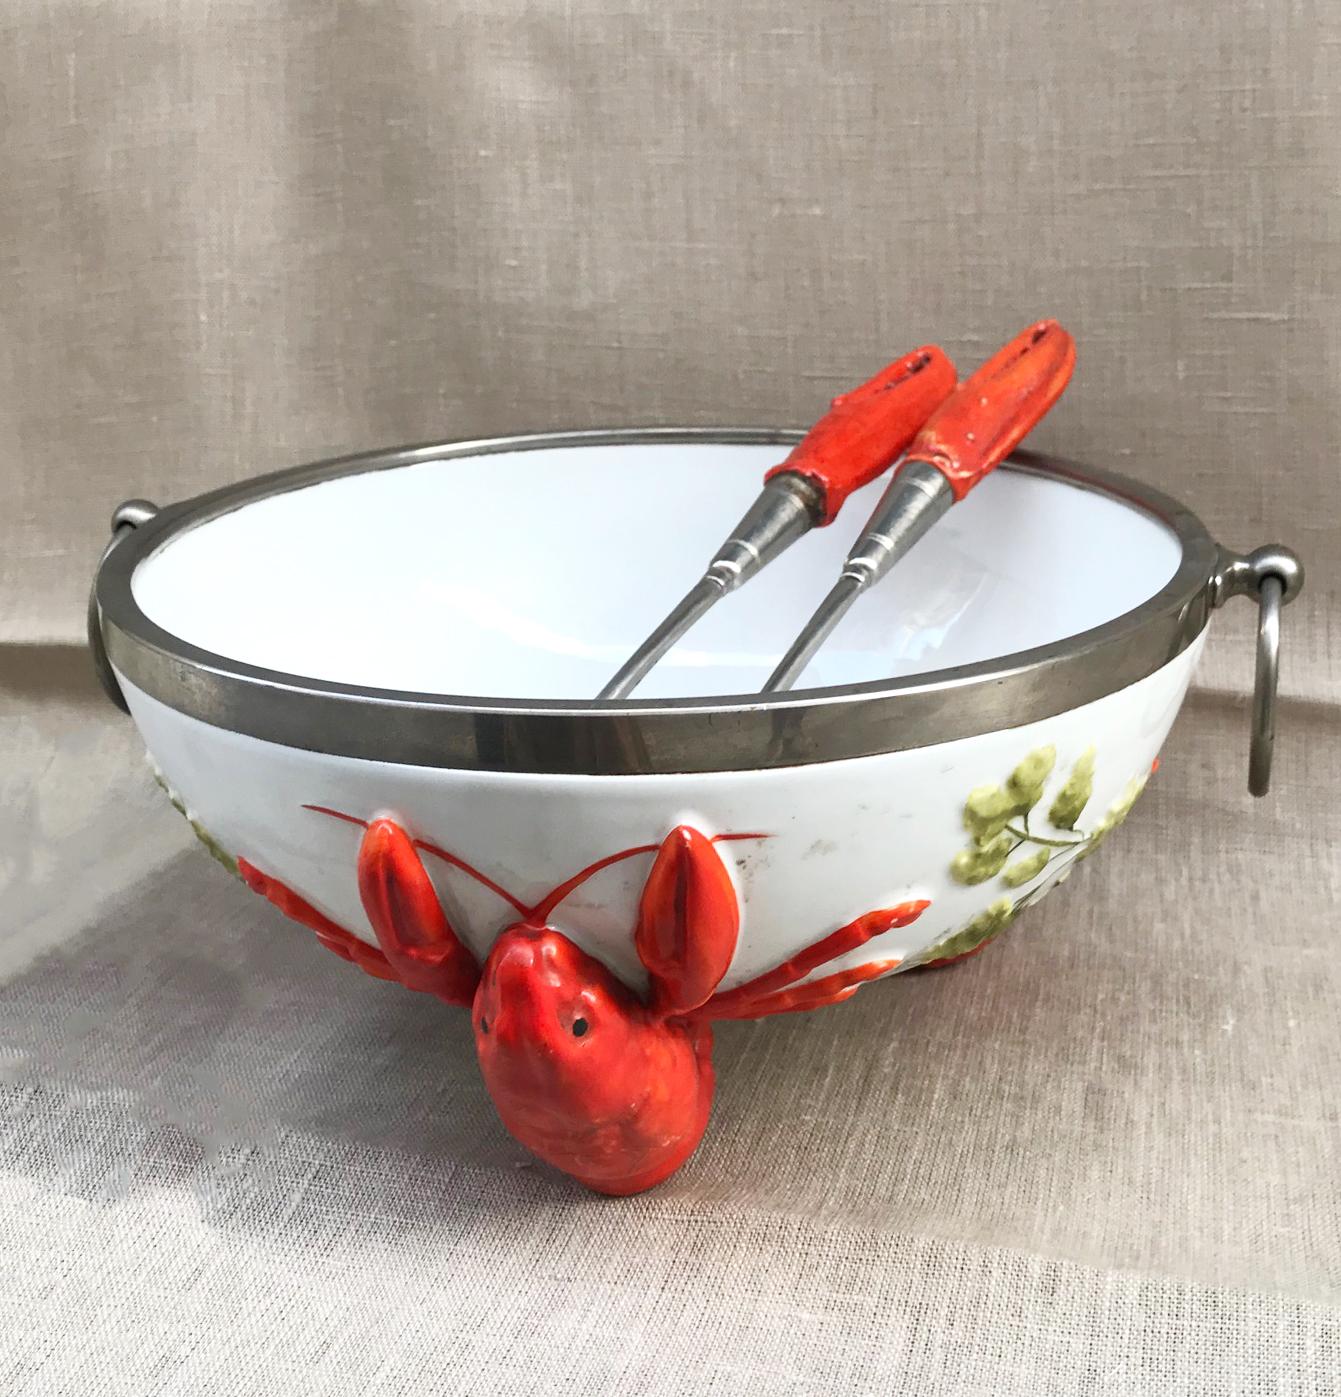 Outstanding three-piece salad set from Musterschutz.
This rare set includes:
1- Salad bowl: White-based salad bowl with lobster figures. The piece has on its upper edge a metal ring and is signed at its base with the signature of the company